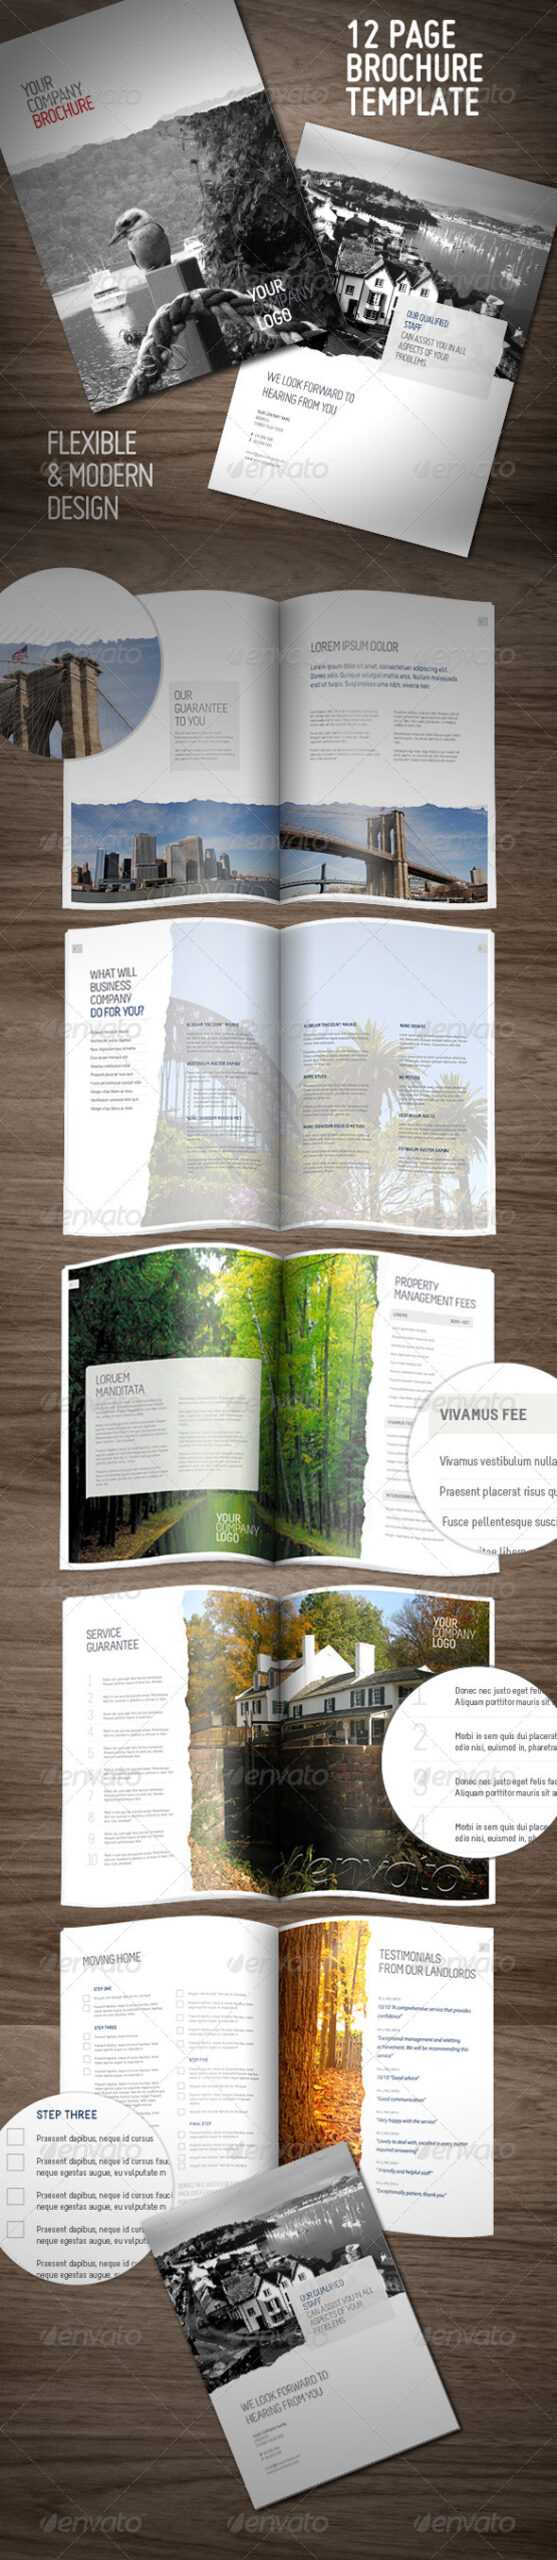 Minimalist Corporate Brochure Templates From Graphicriver Within 12 Page Brochure Template